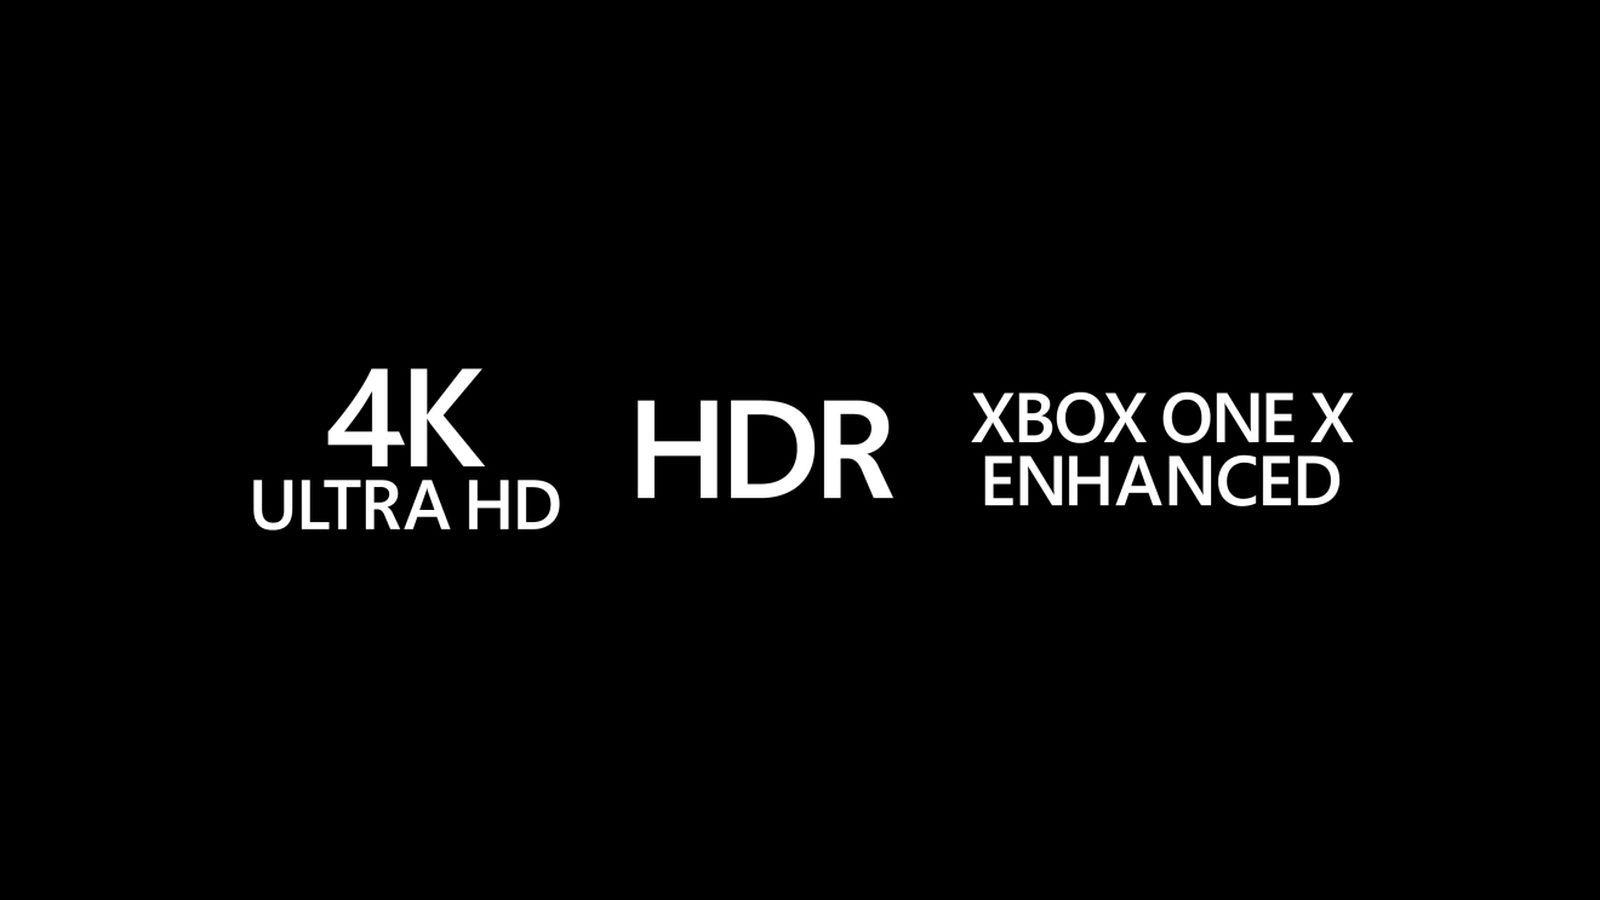 HDR Logo - Look for these Xbox One X logos to know you're getting enhanced 4K ...